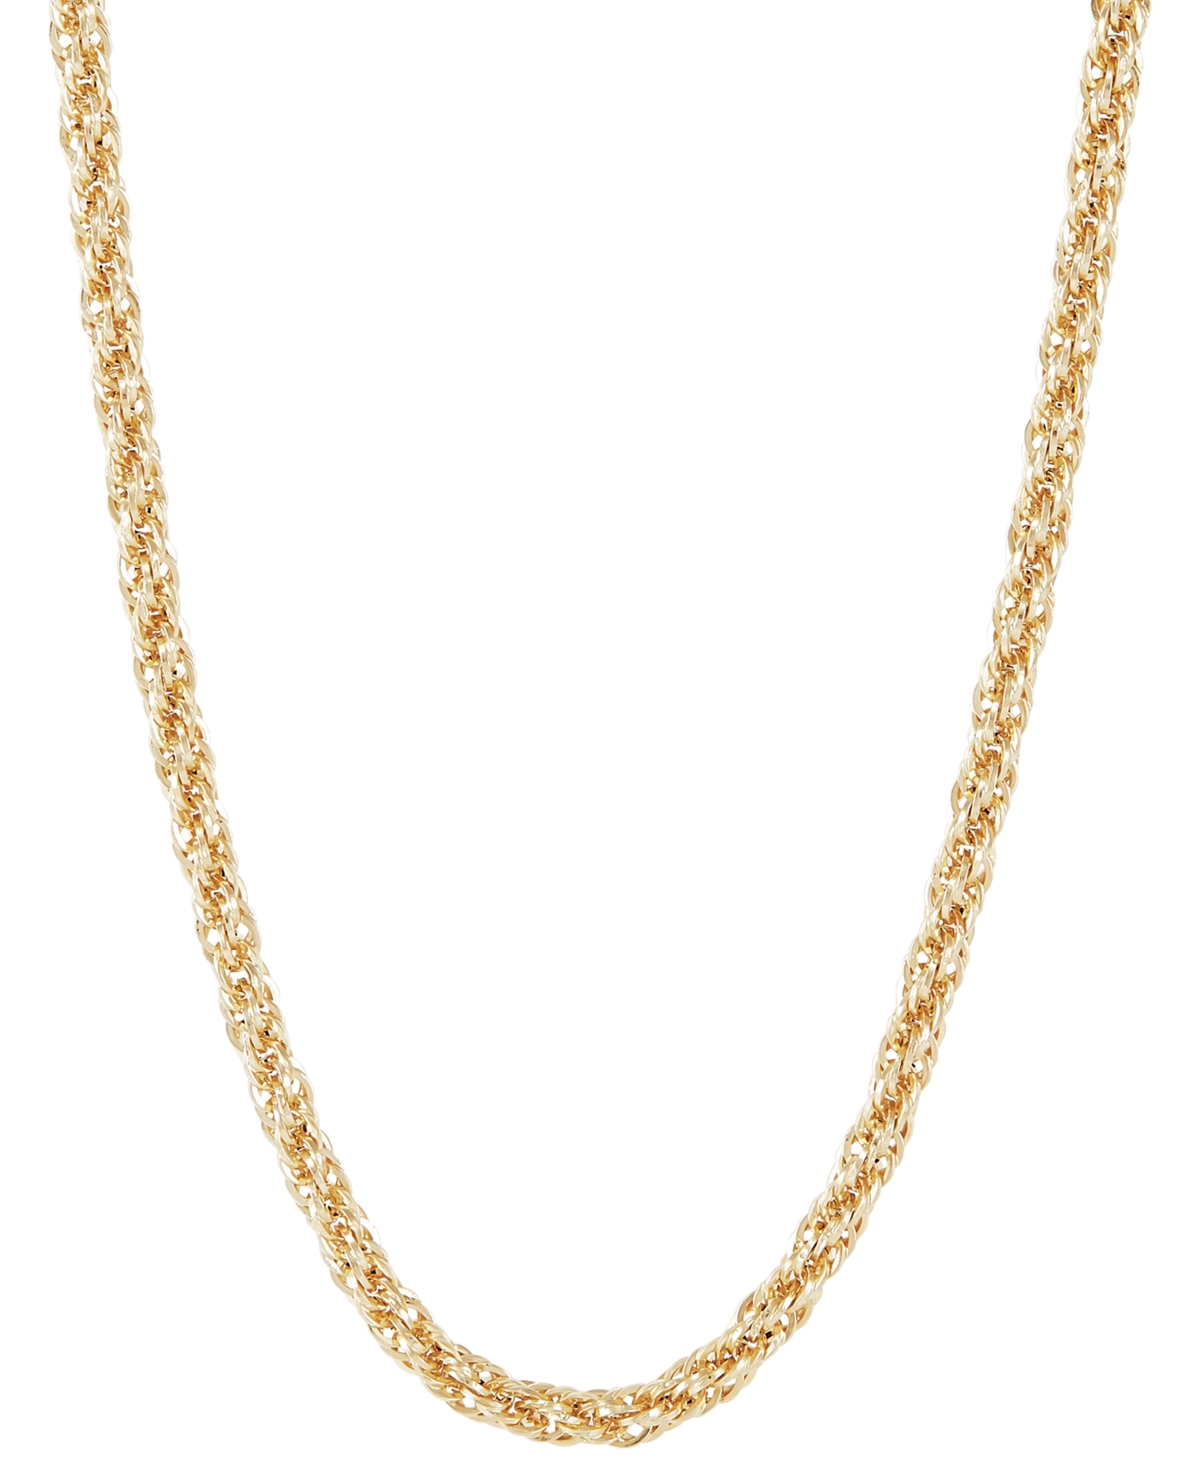 Macy's Polished Rope Link 20" Chain Necklace in 14k Gold